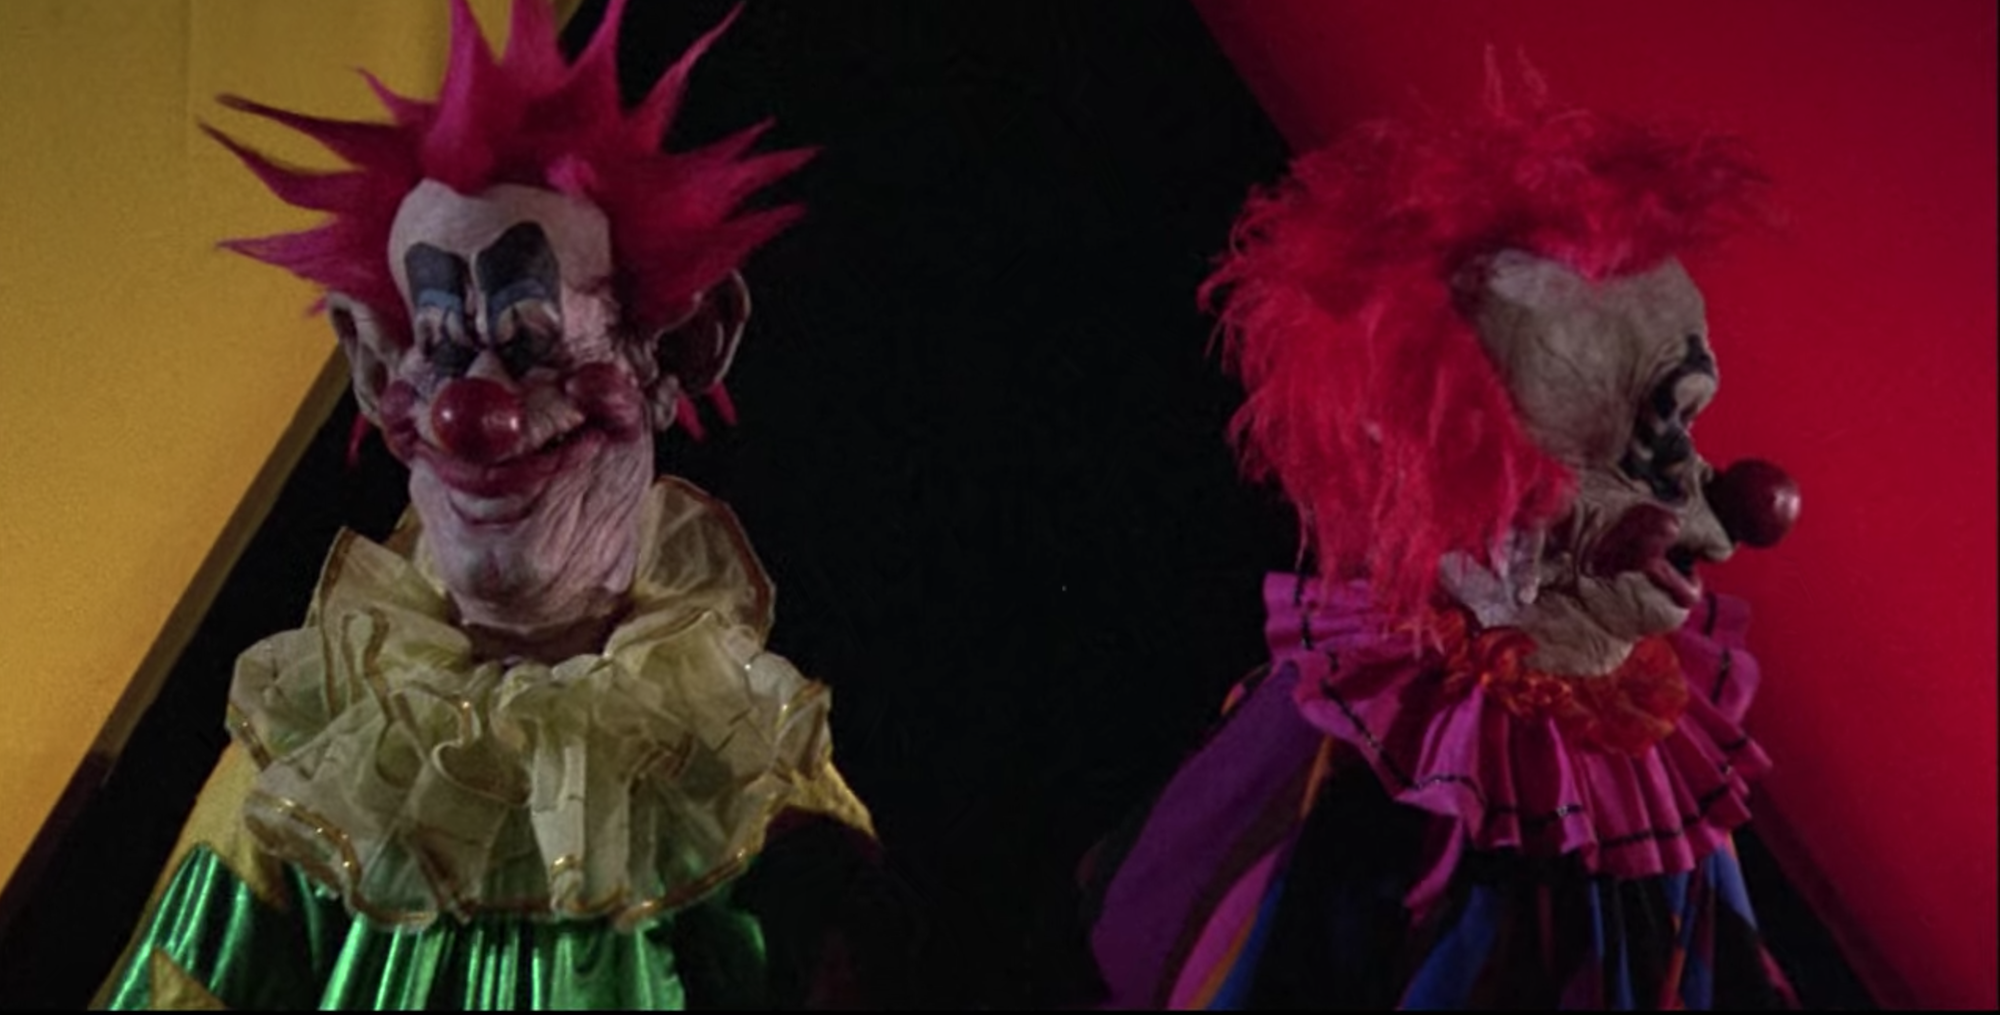 Stills from Killer Klowns from Outer Space (1988). 